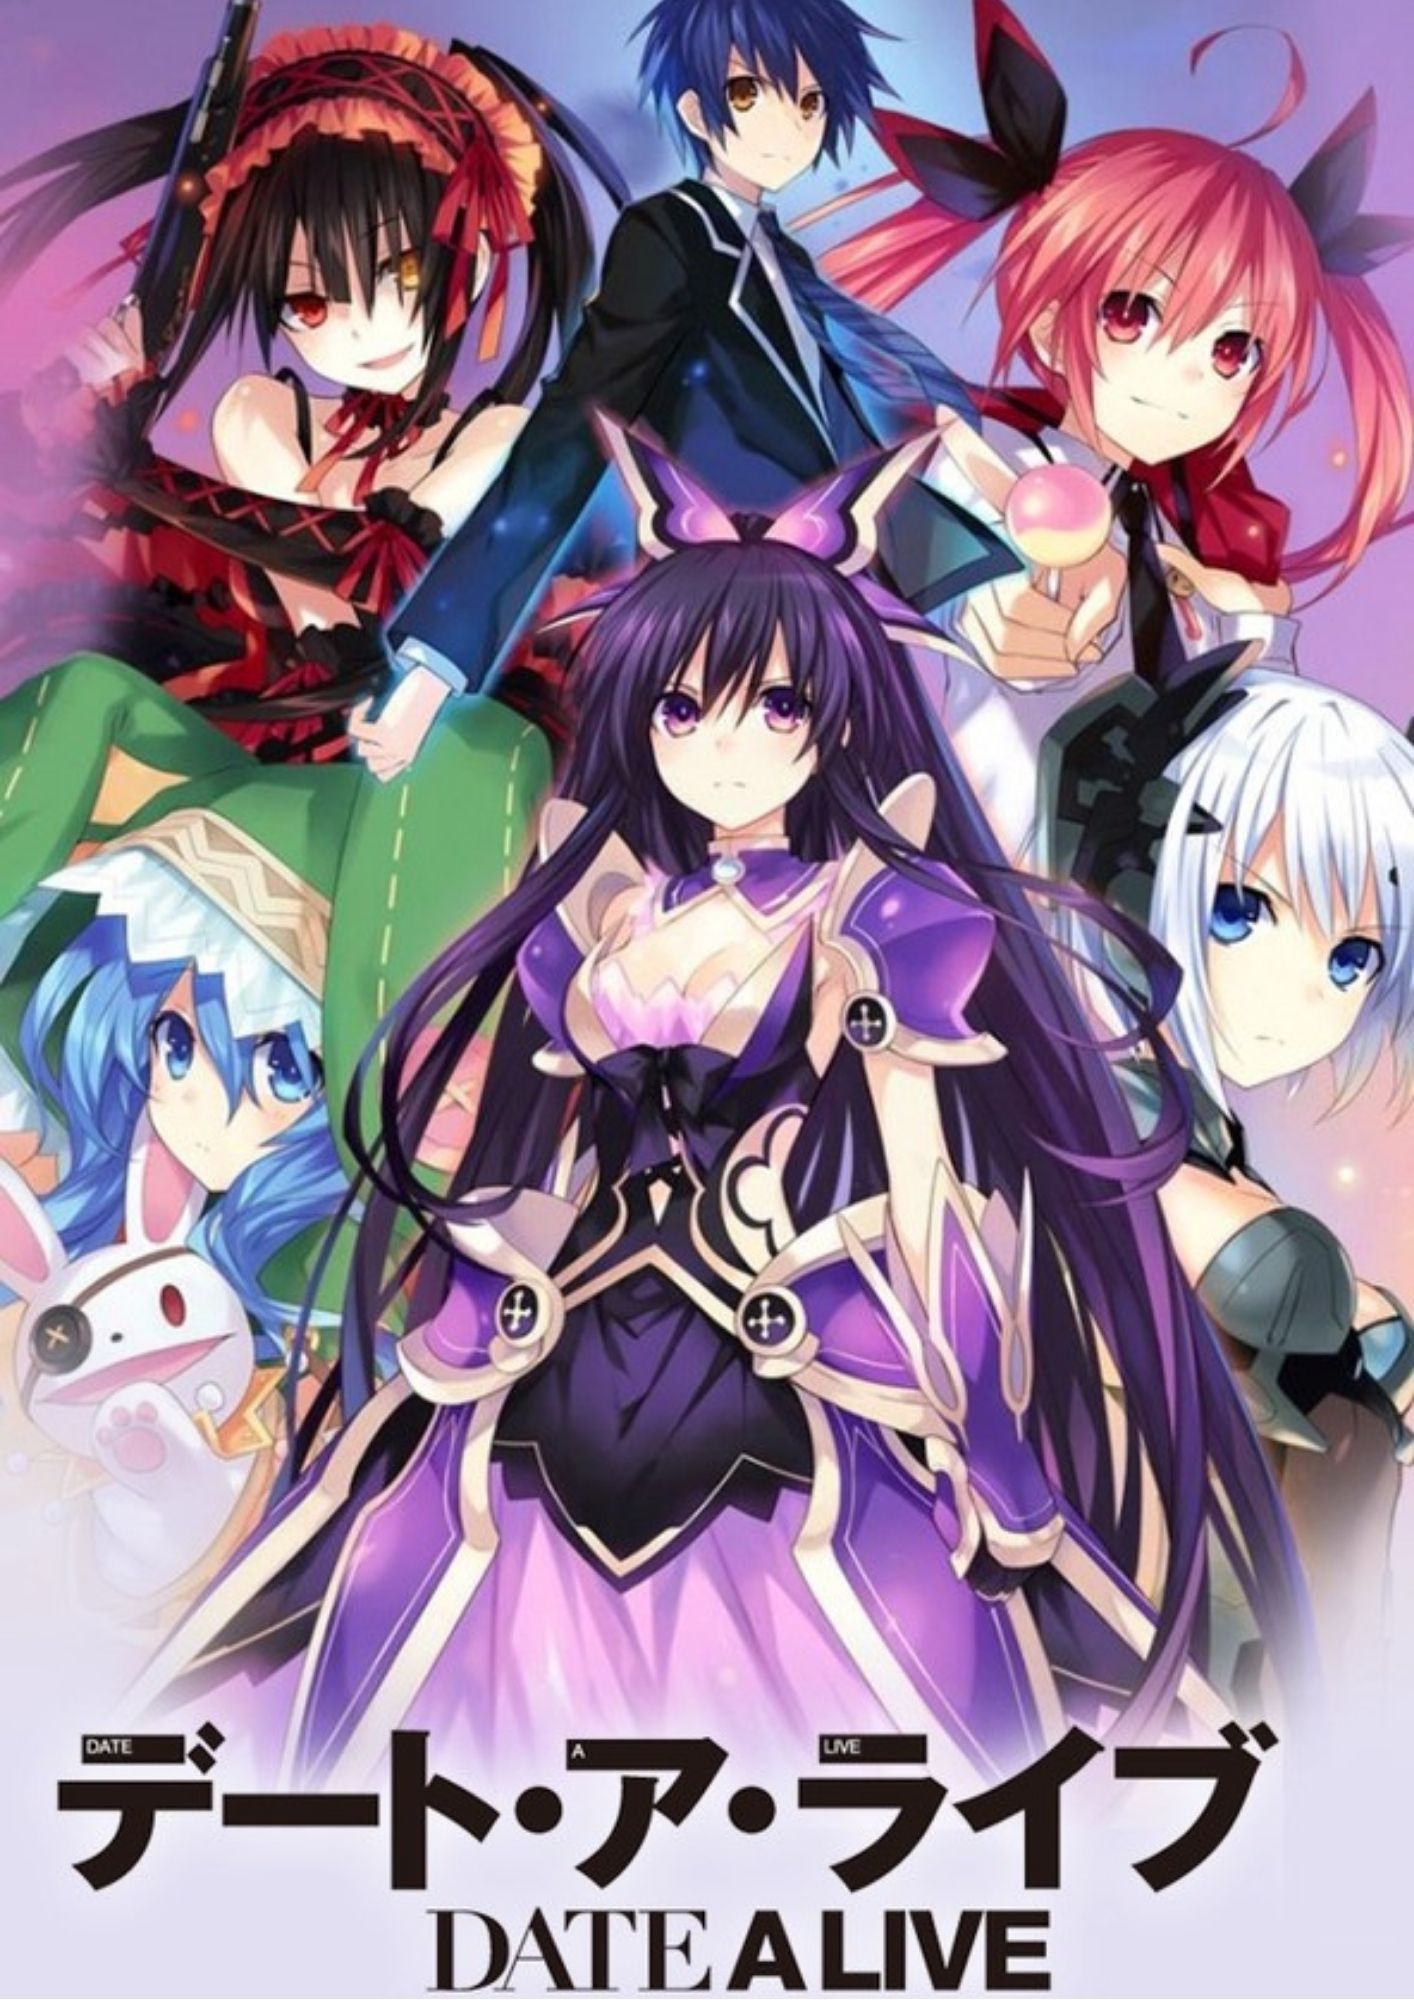 Date A Live: Spirit Pledge APK Download for Android Free